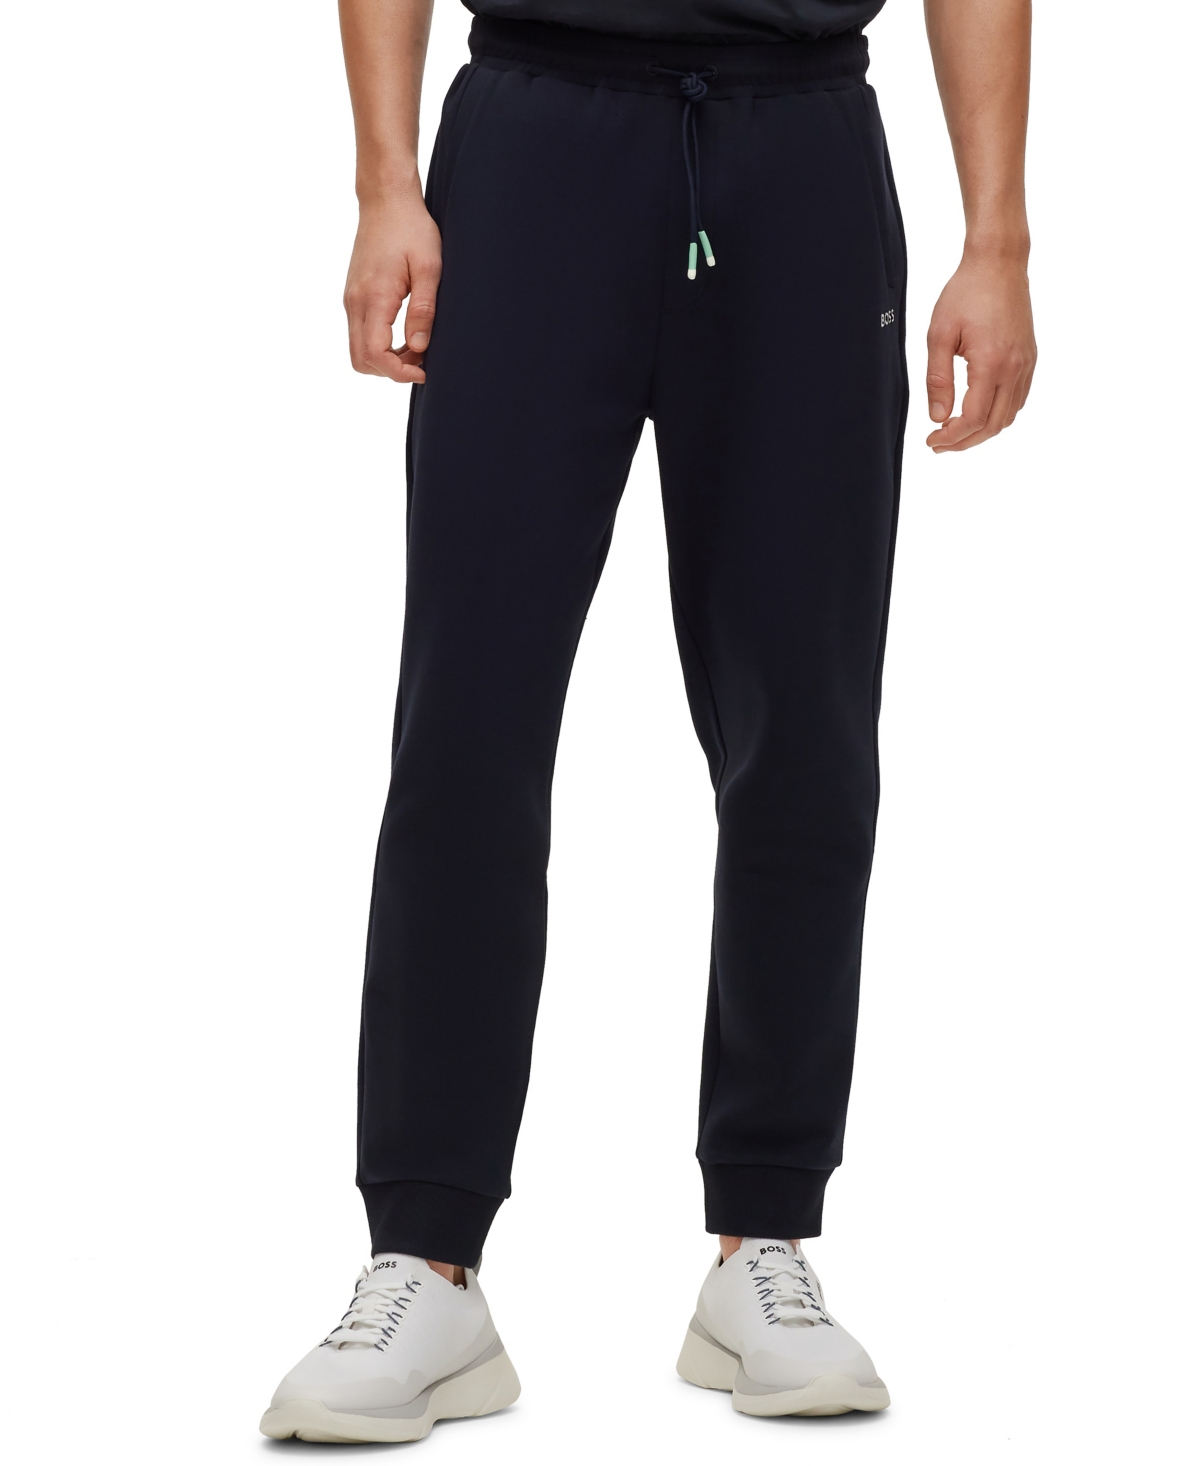 HUGO BOSS BOSS BY HUGO BOSS MEN'S COTTON-BLEND TRACKSUIT BOTTOMS WITH EMBROIDERED LOGOS